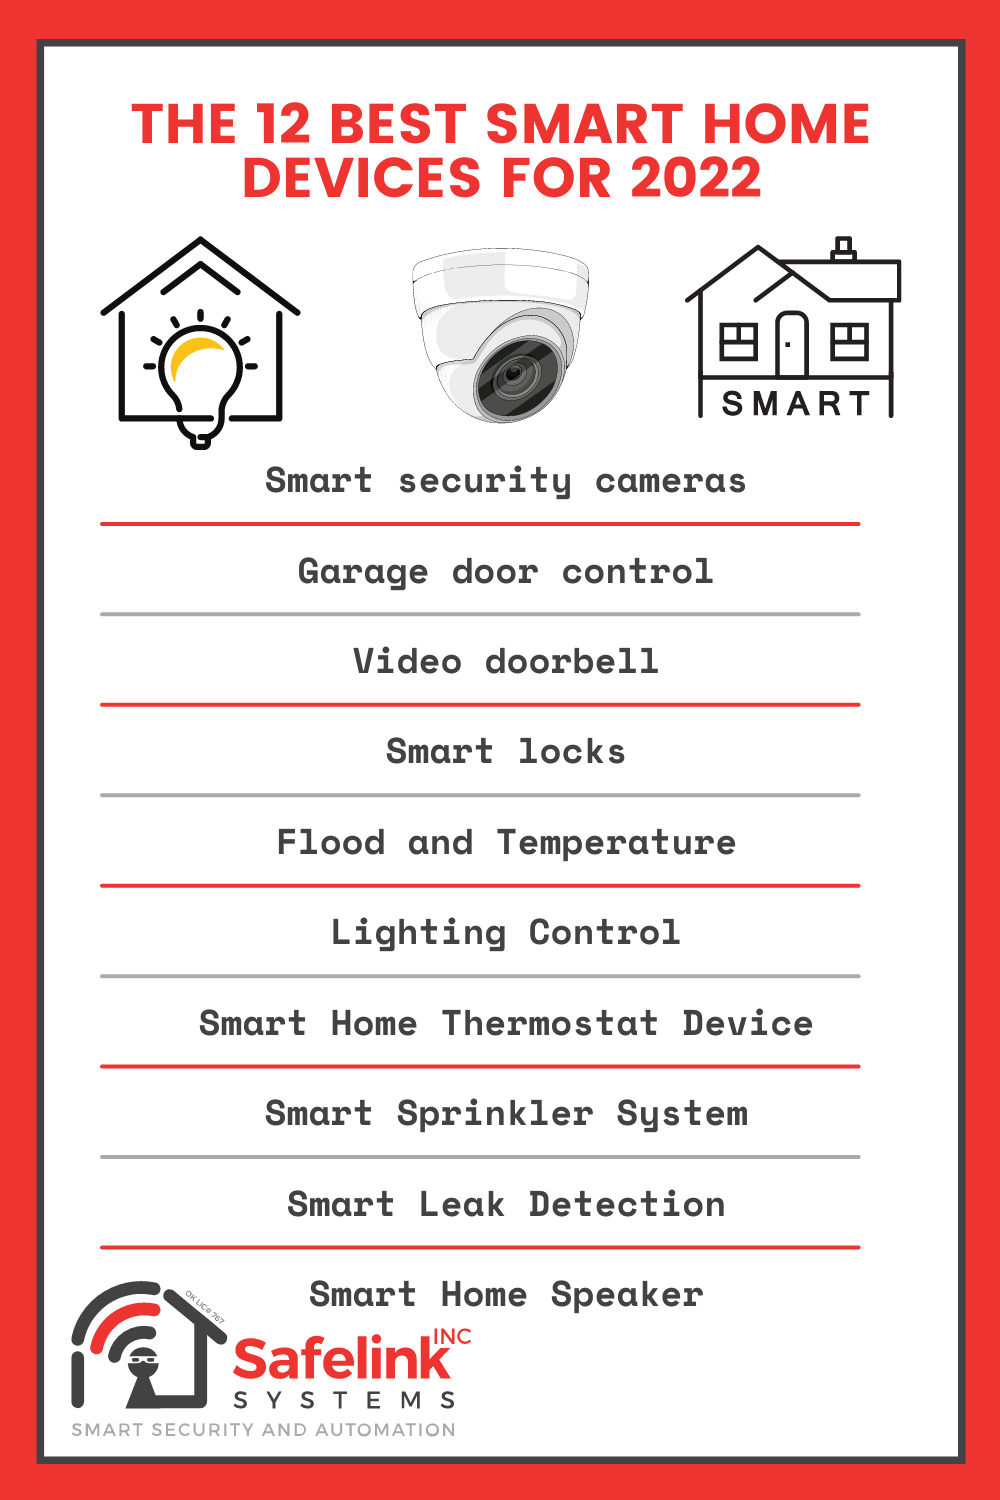 This is an infographic about the article The 12 Best Smart Home Devices for 2022